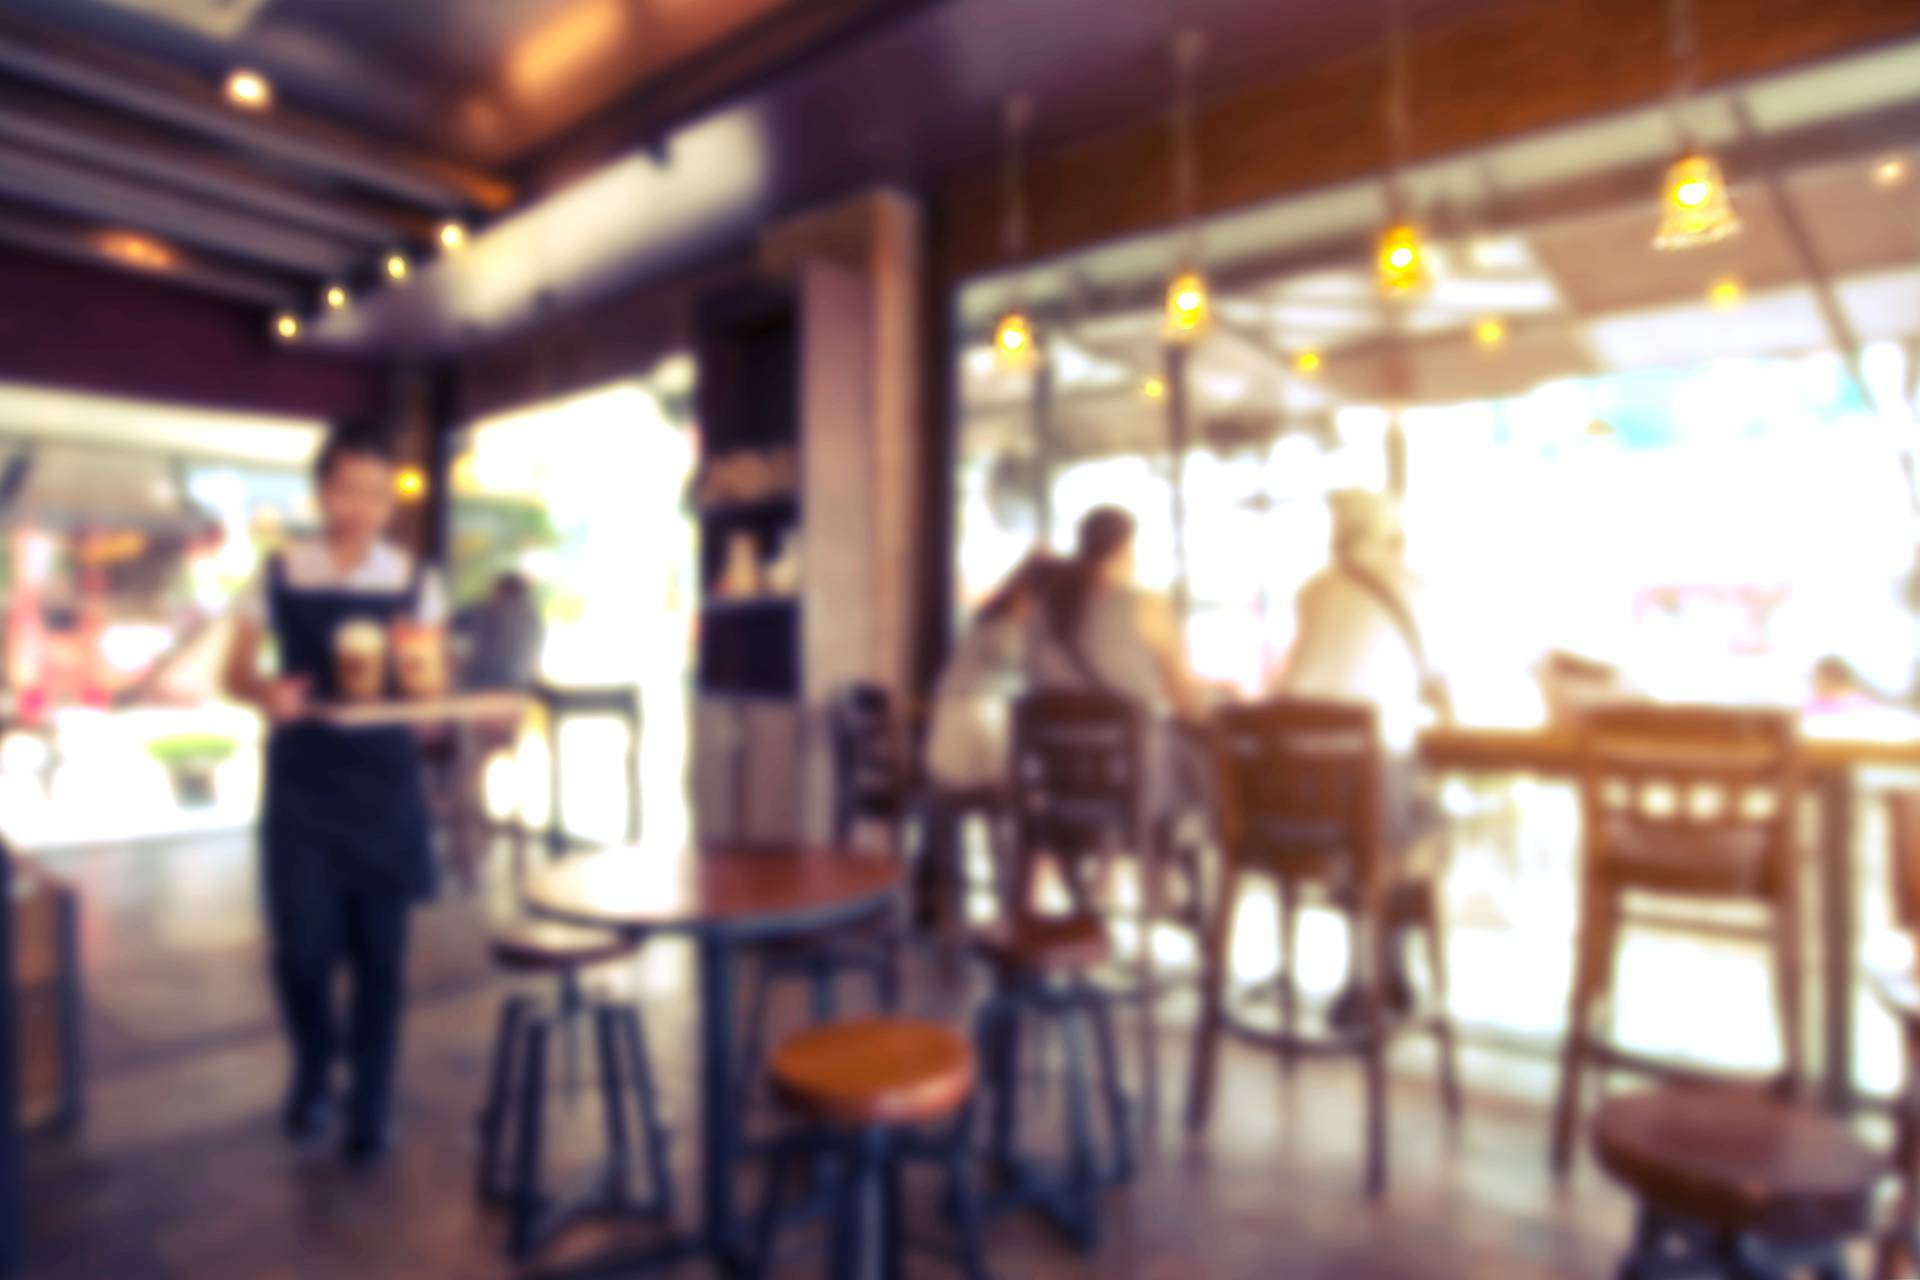 Coffee,Shop,-,Cafe,Blurred,With,Bokeh,Background